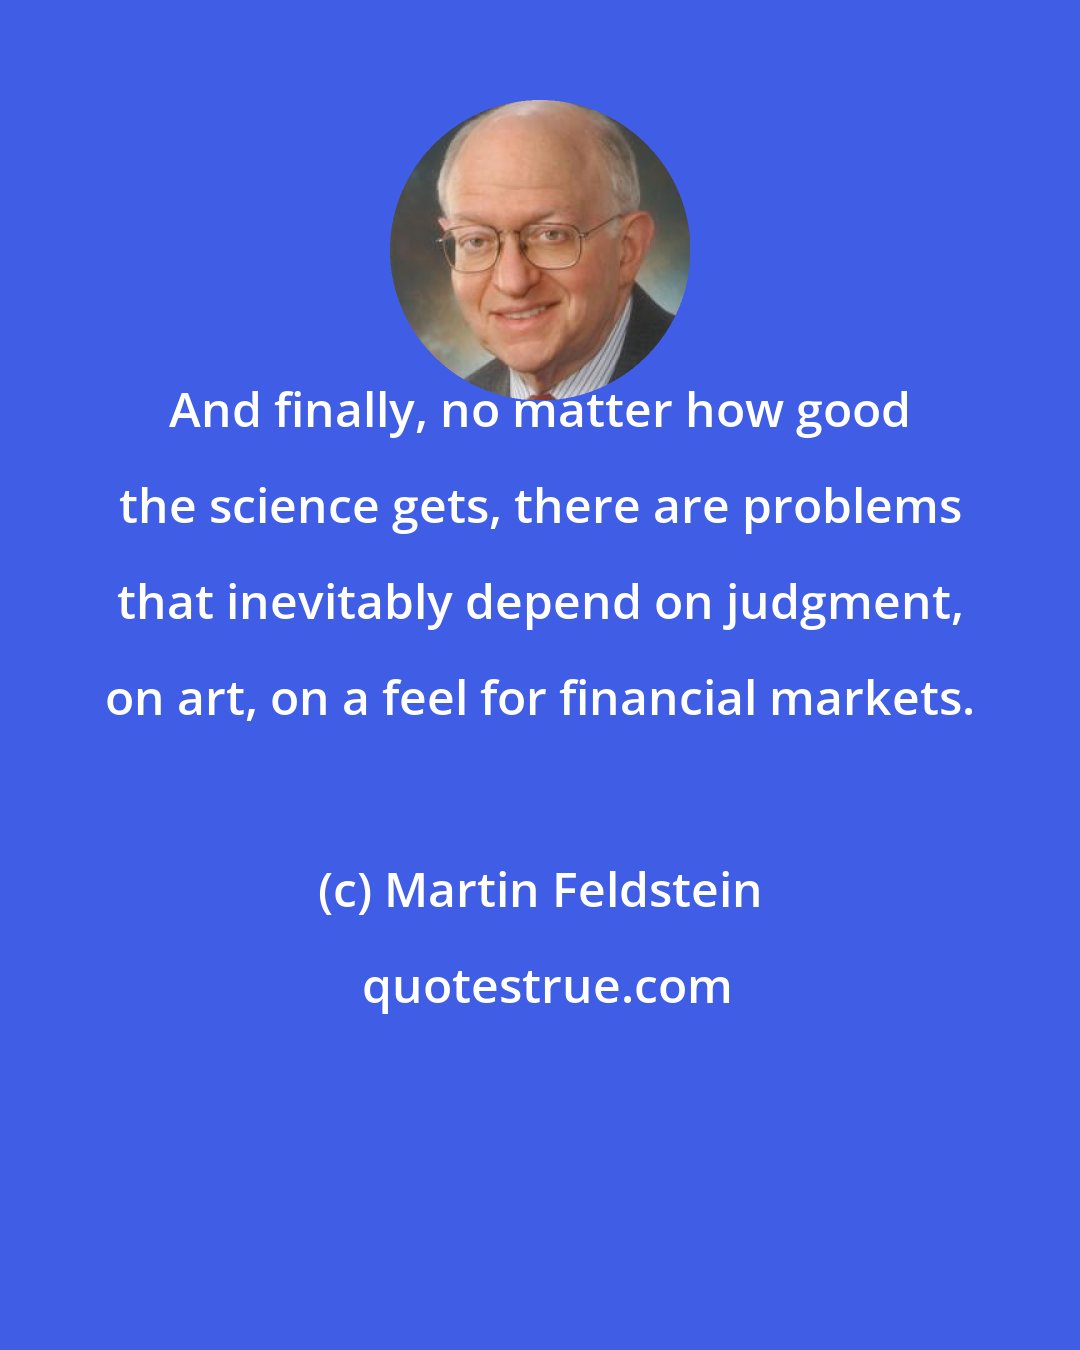 Martin Feldstein: And finally, no matter how good the science gets, there are problems that inevitably depend on judgment, on art, on a feel for financial markets.